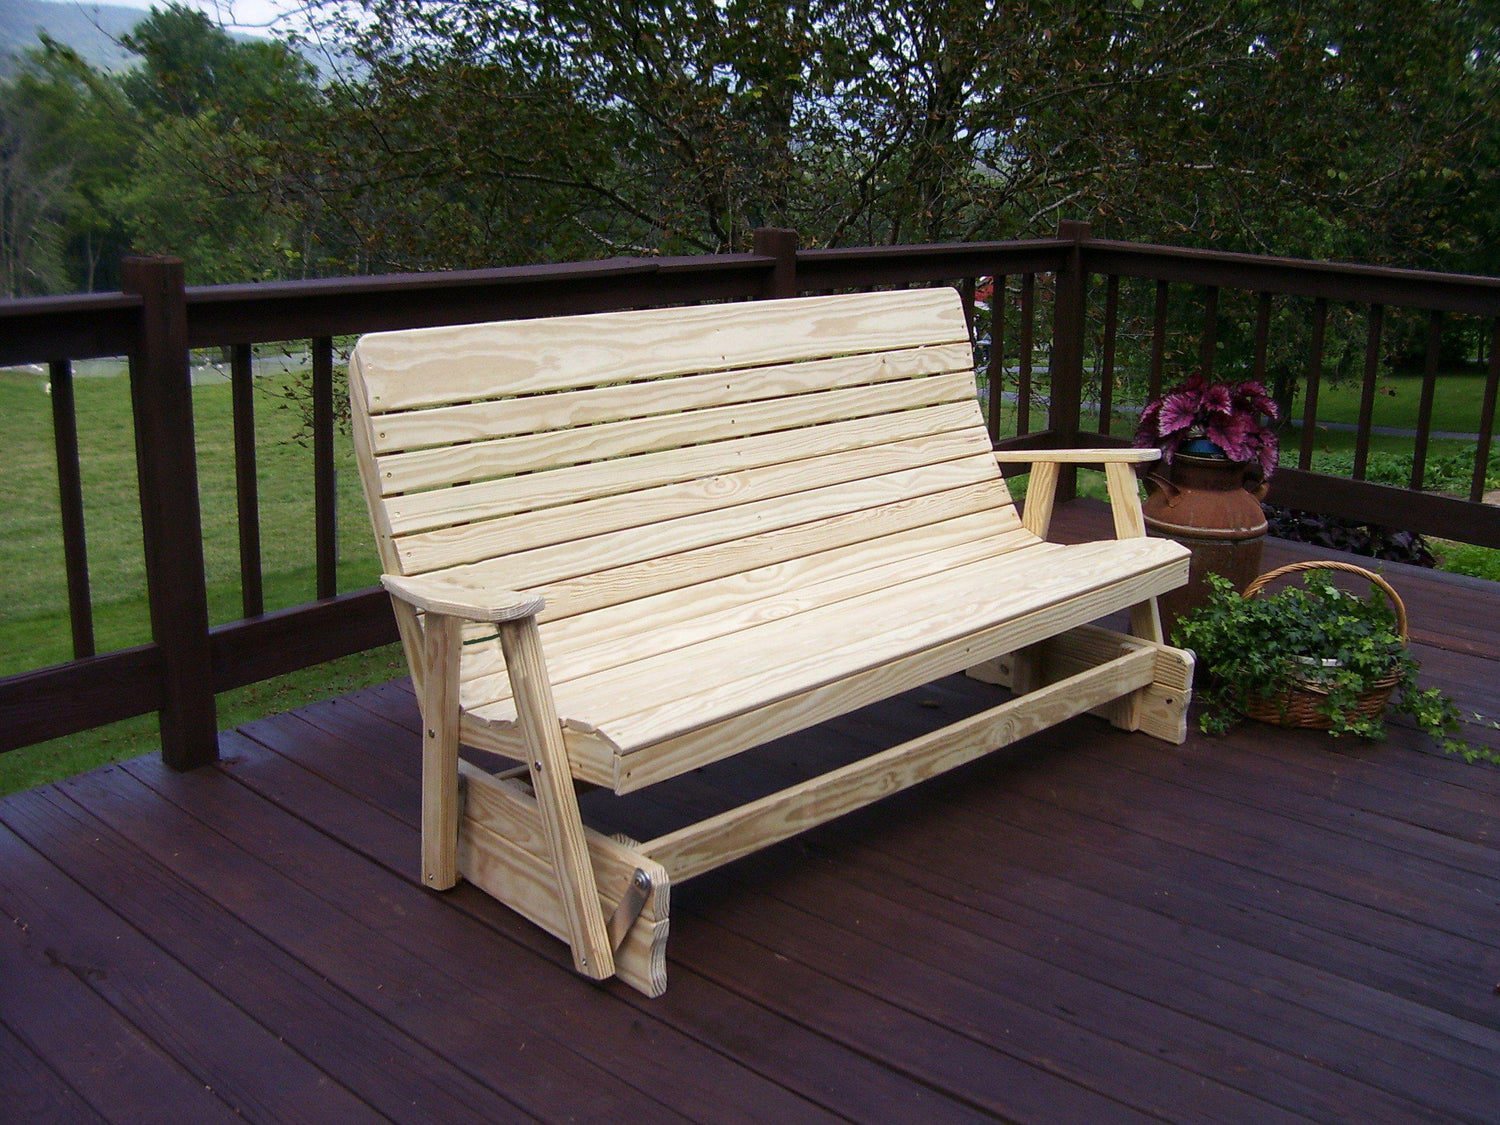 Pressure Treated Pine Outdoor Patio Gliders - Made in America